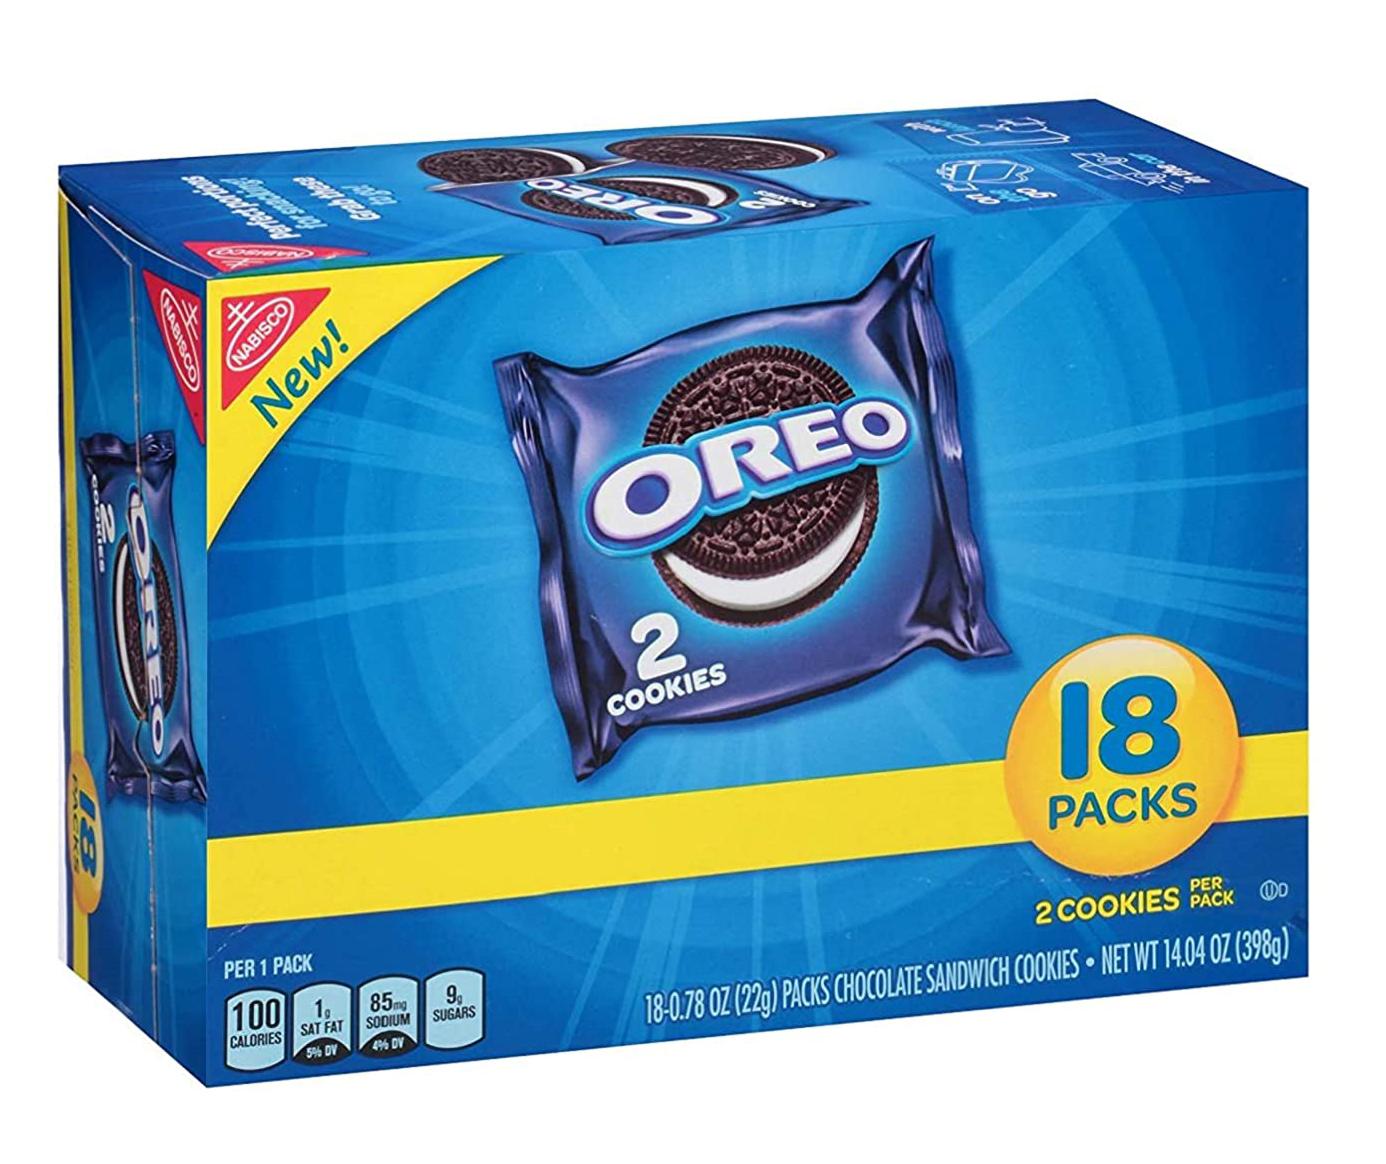 72 Oreo Chocolate Sandwich Cookie Snack Packs for $10.29